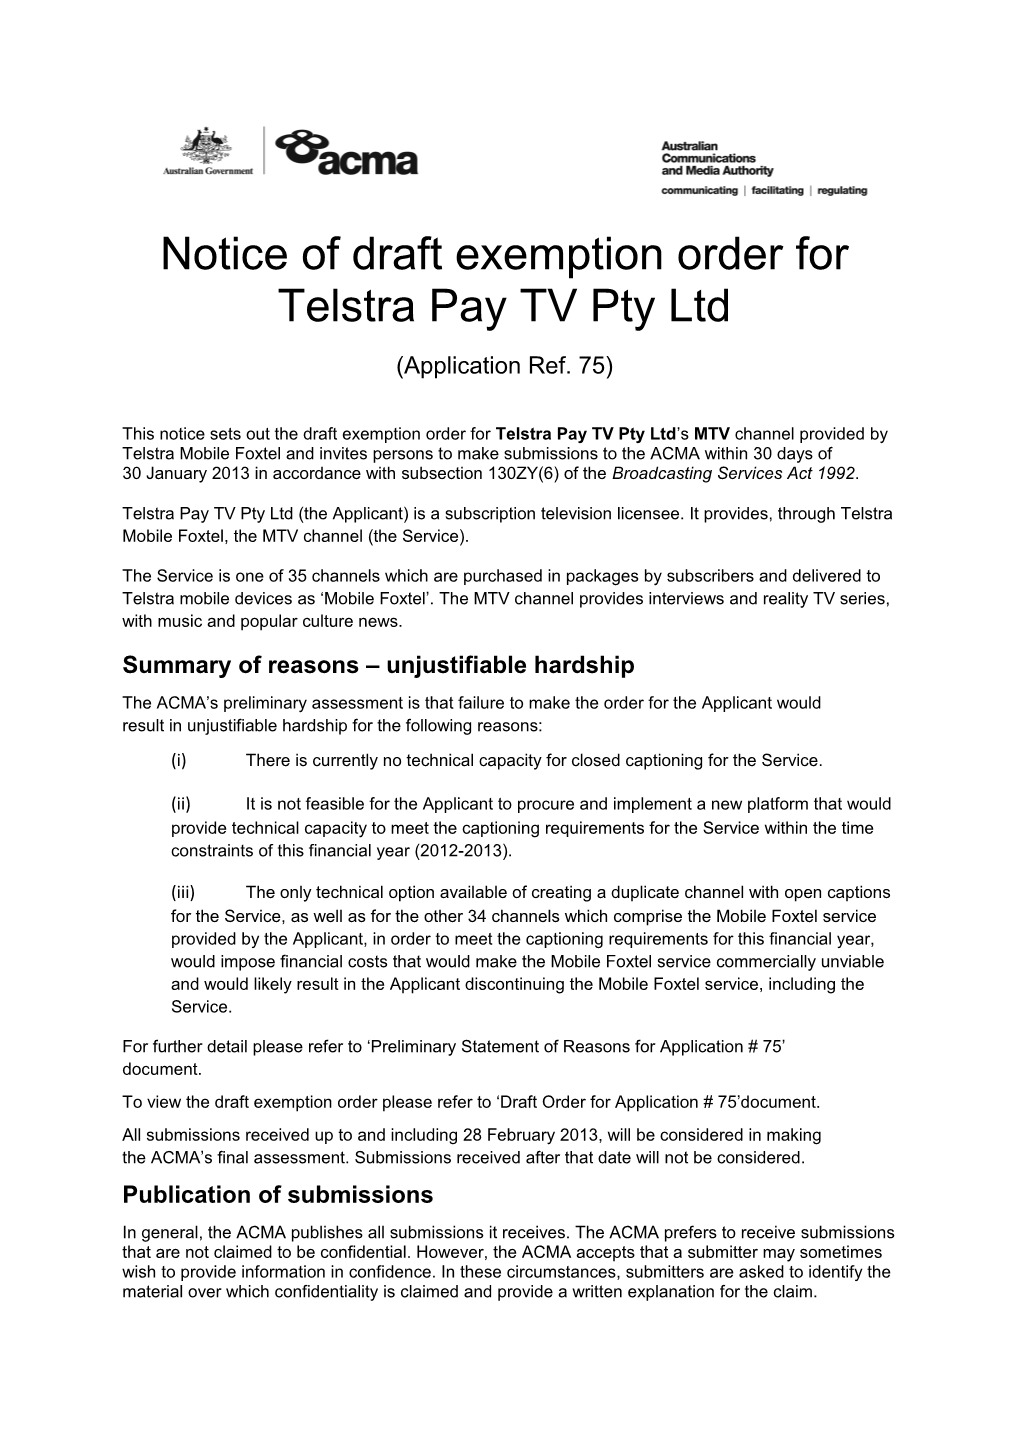 Notice of Draft Exemption Order for Telstra Pay TV Pty Ltd Cons # 75